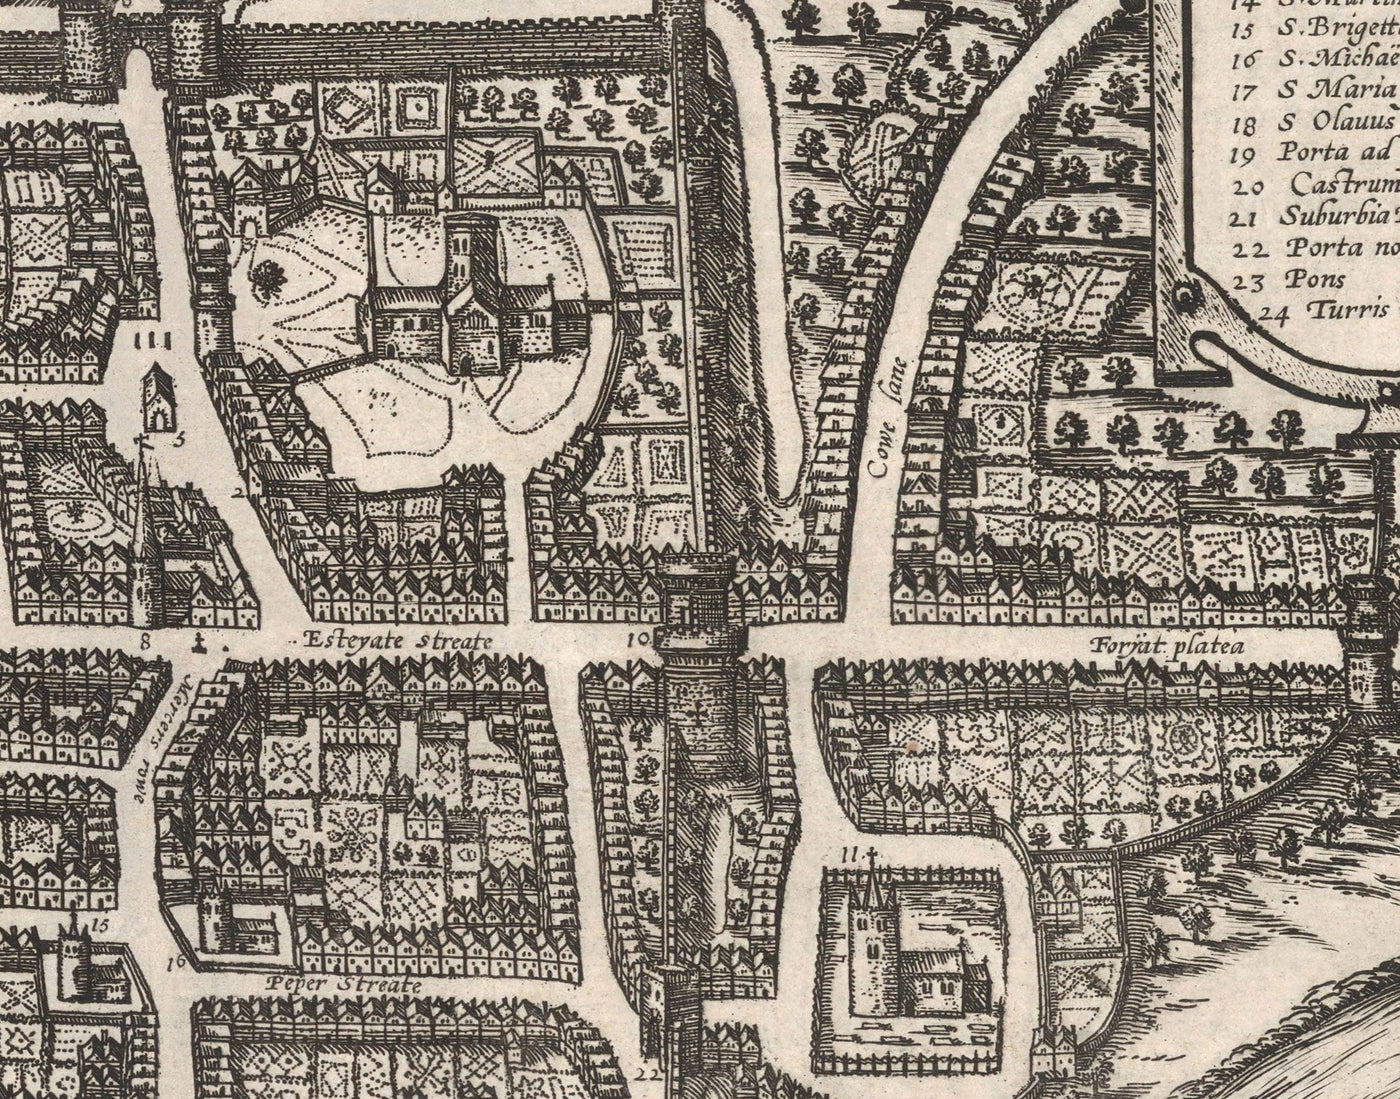 Old Map of Chester, Cheshire 1581 by Georg Braun - Castle, Cathedral, Roman City Walls